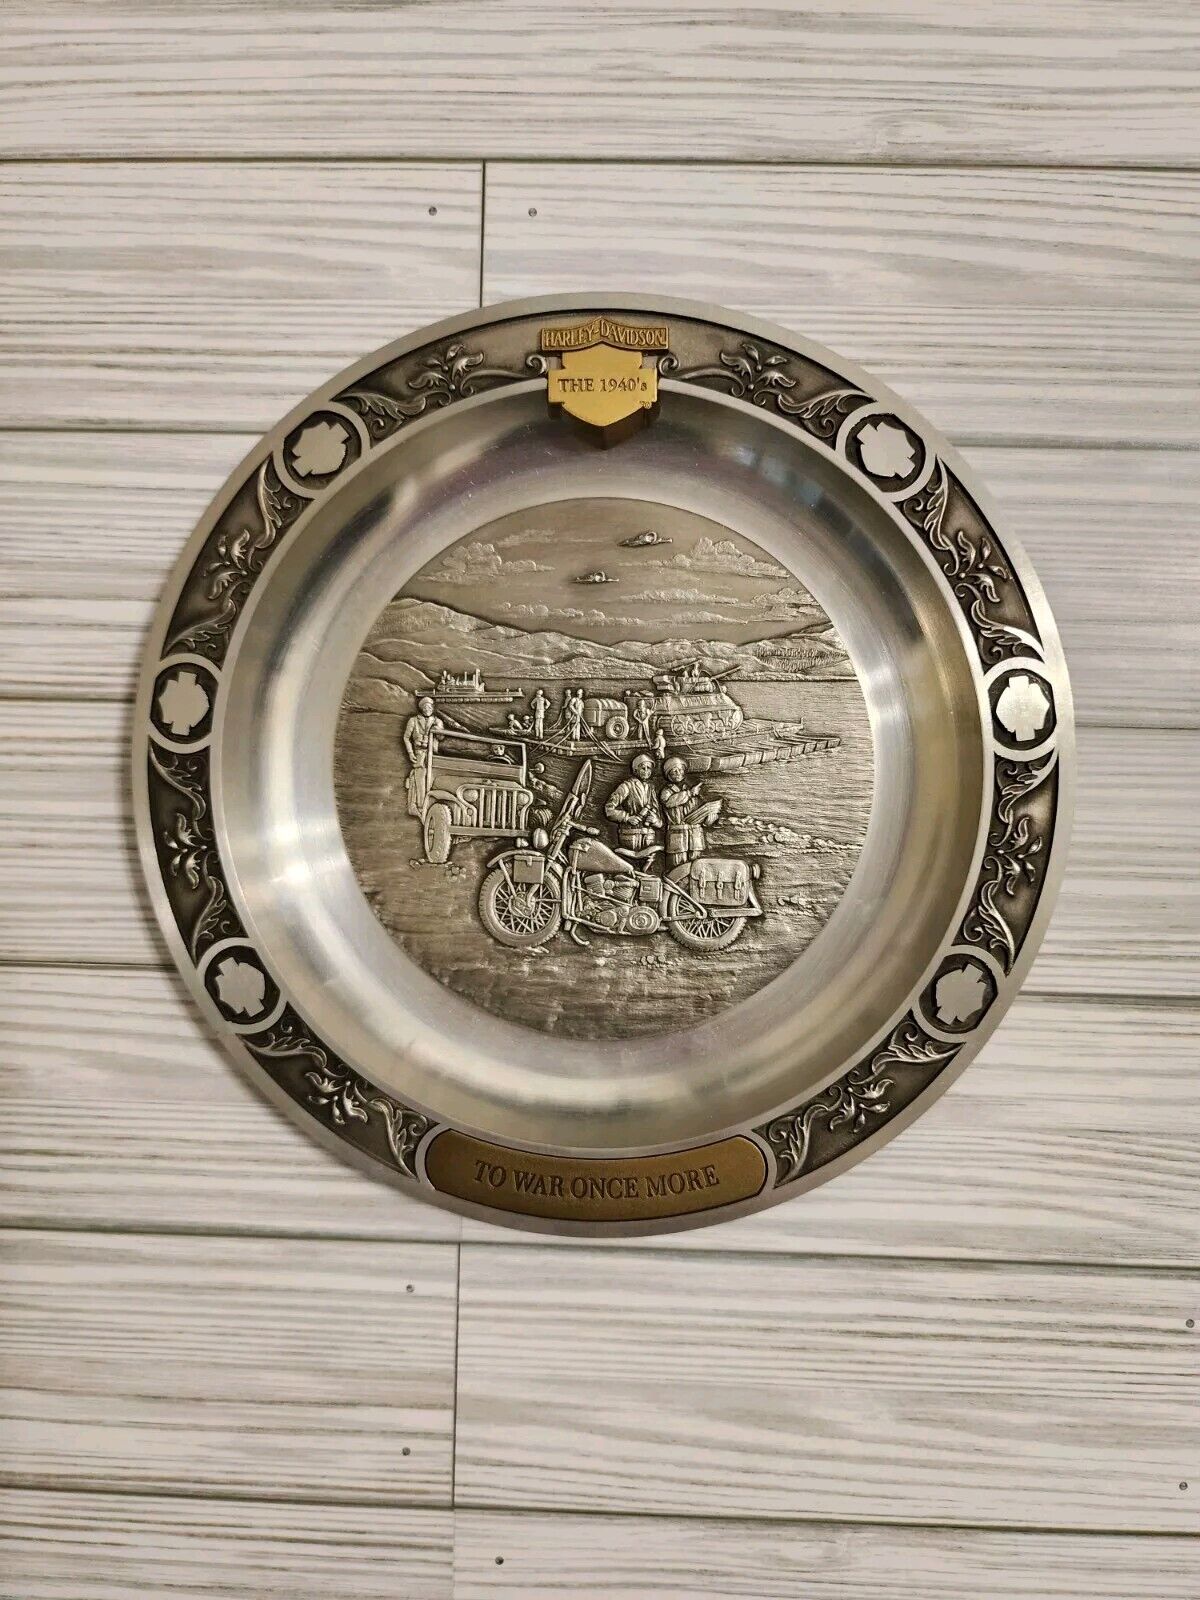 Harley Davidson Collector Pewter Plate  THE 1940s TO WAR ONCE MORE